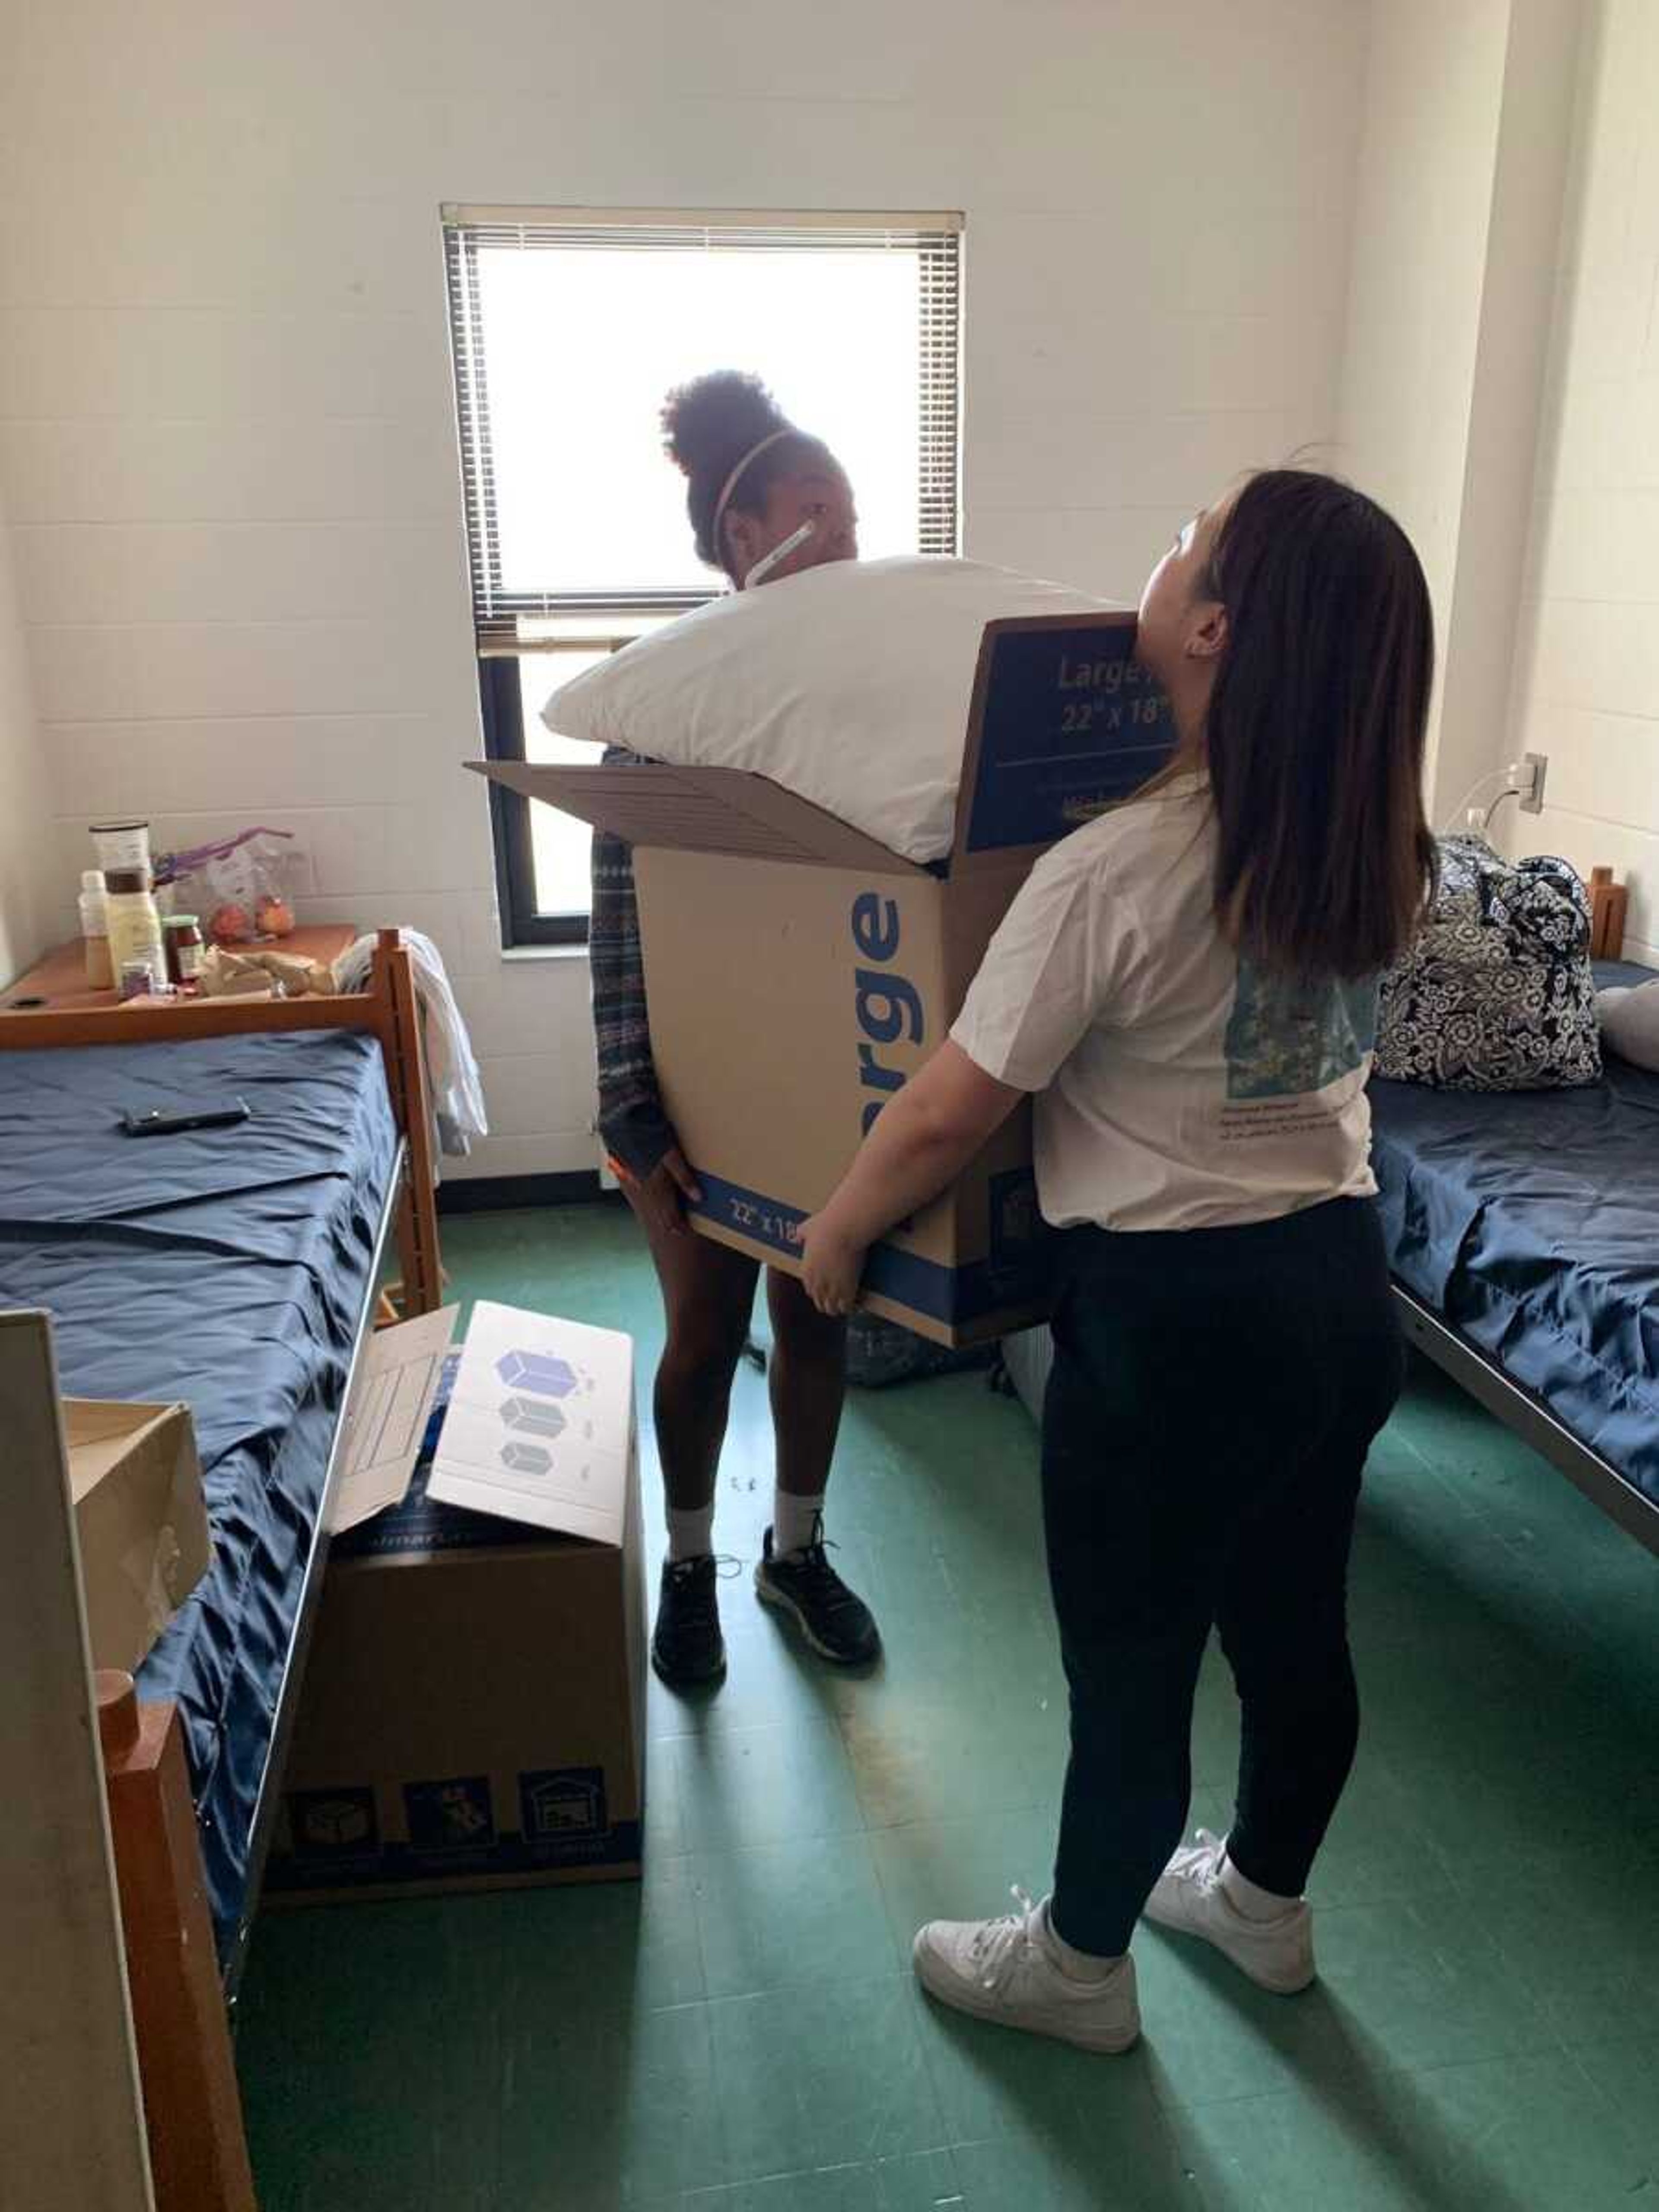 Alyssa Reed (Left) and Lina Nakata (Right) moving out the dorm on March 30th.